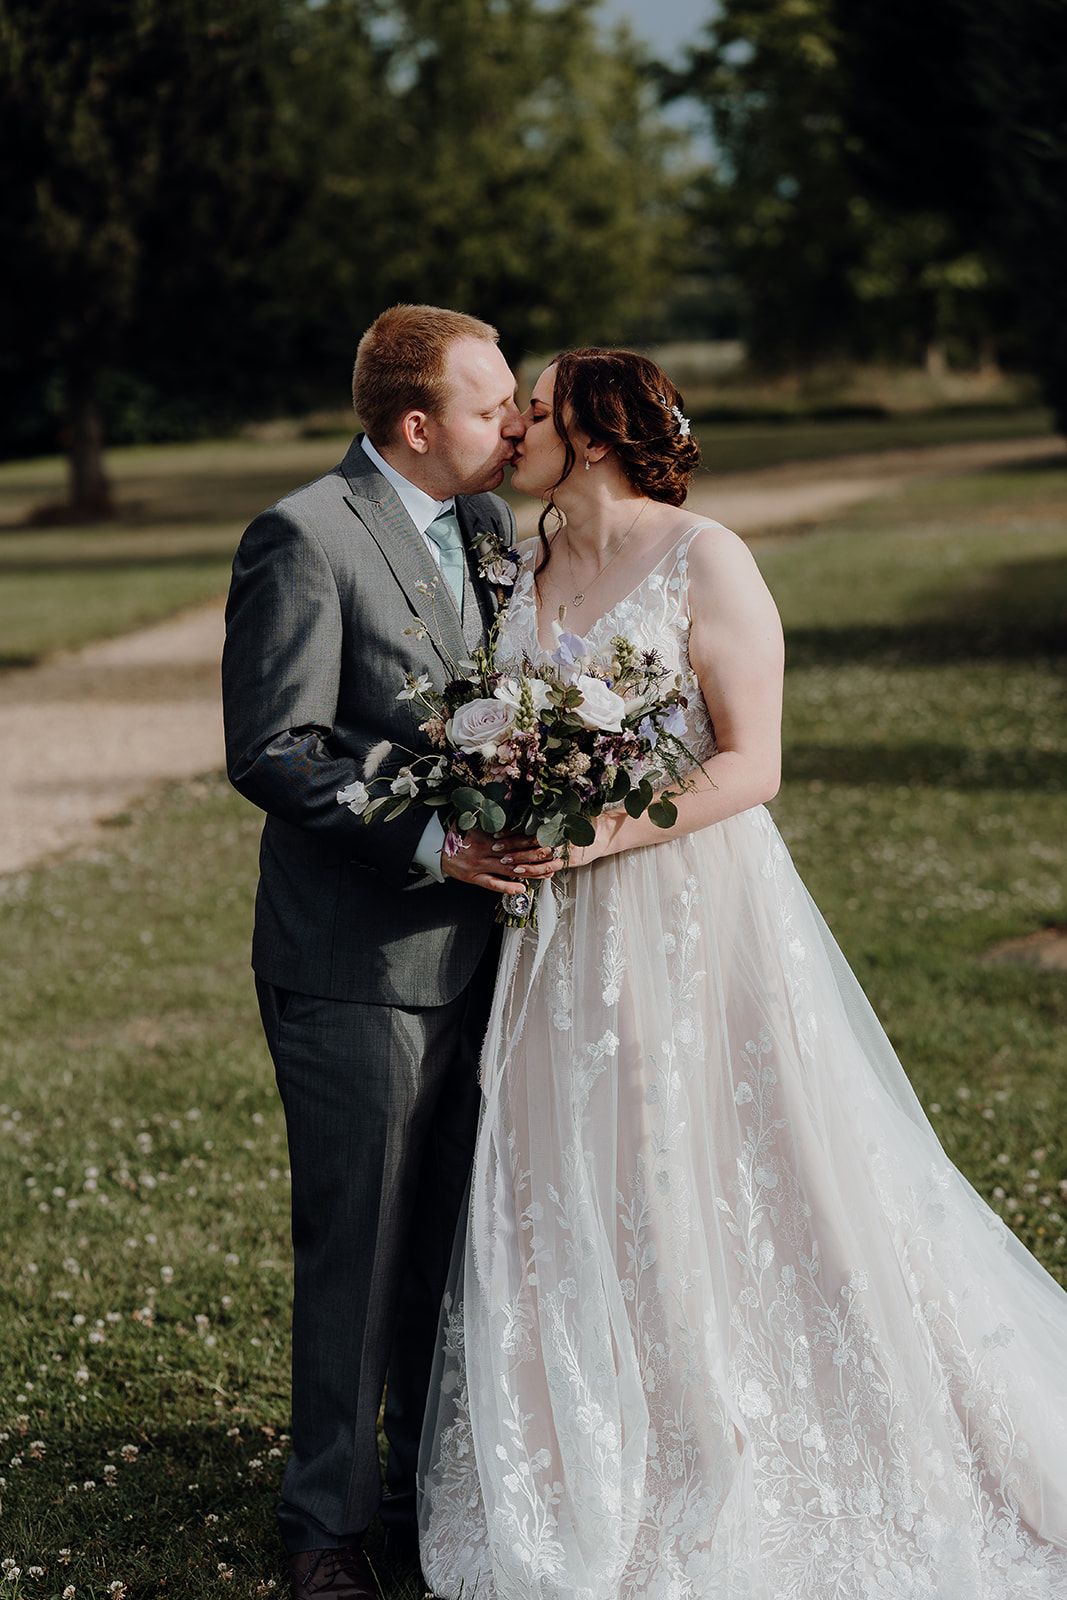 Georgie and James kissing in the gardens of Huntsmill Farm. Photo thanks to Sam and Steve Photography. Fun wedding highlights film by Veiled Productions.